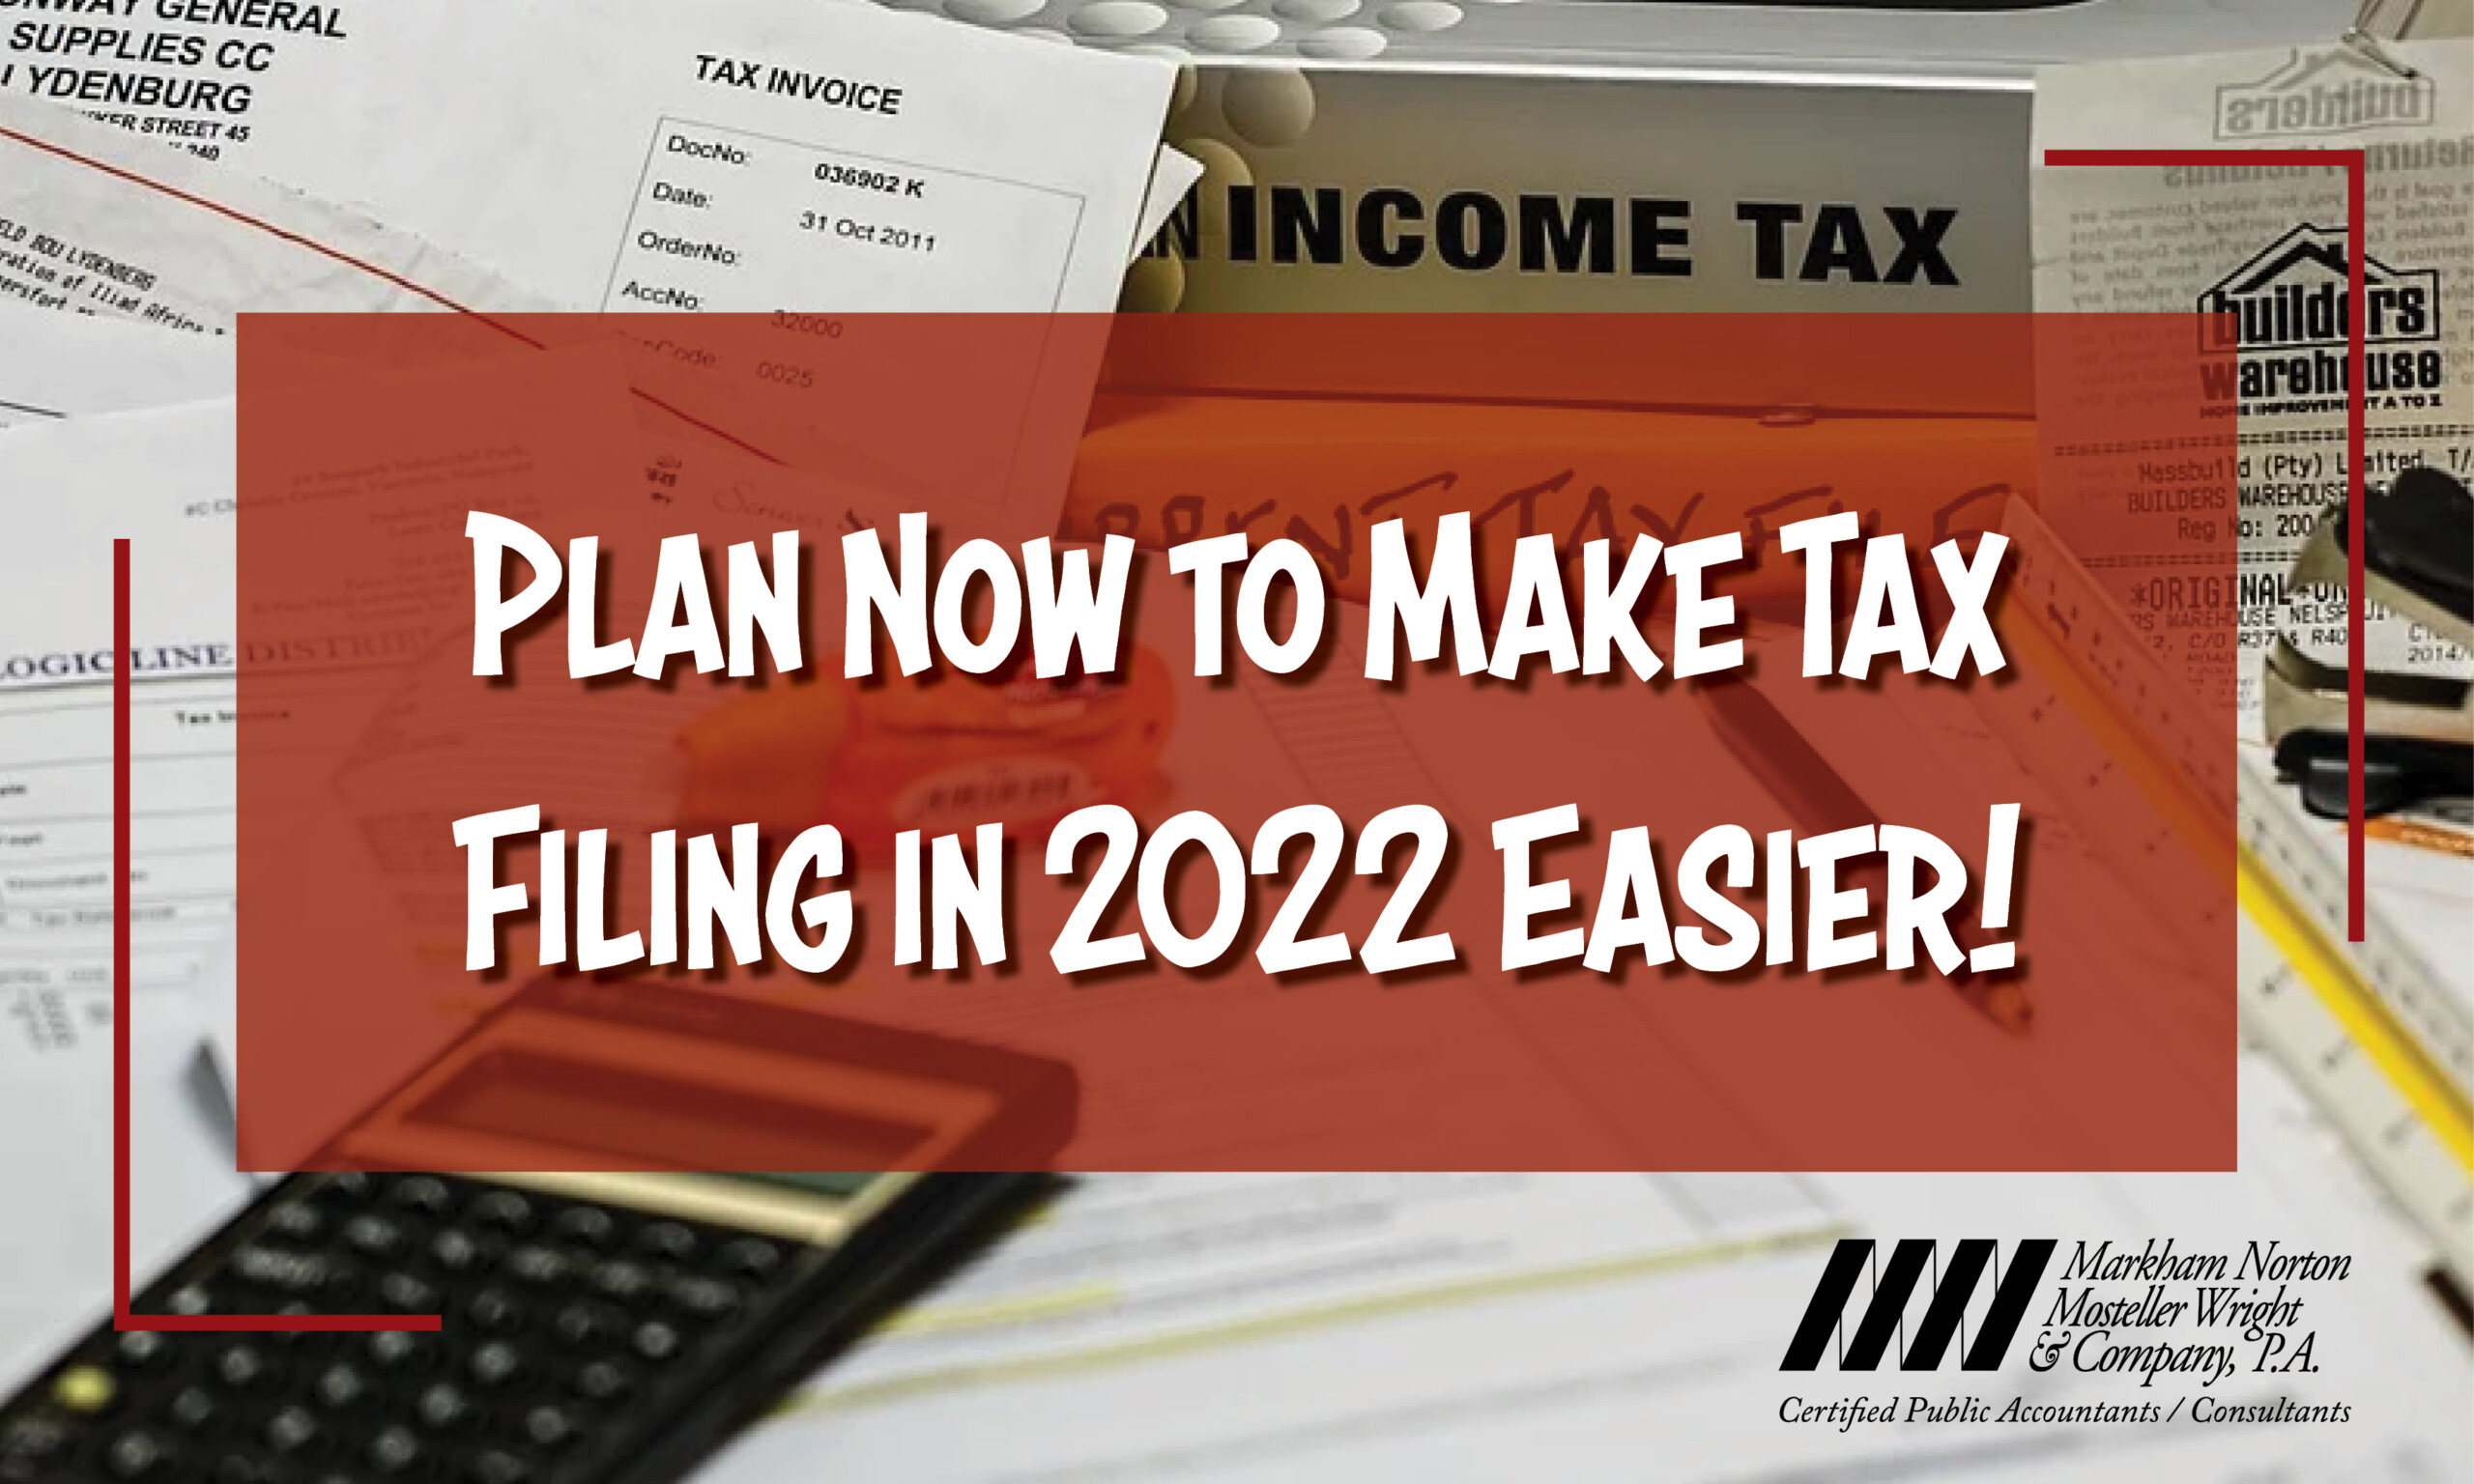 Plan Now to Make Tax Filing in 2022 Easier!